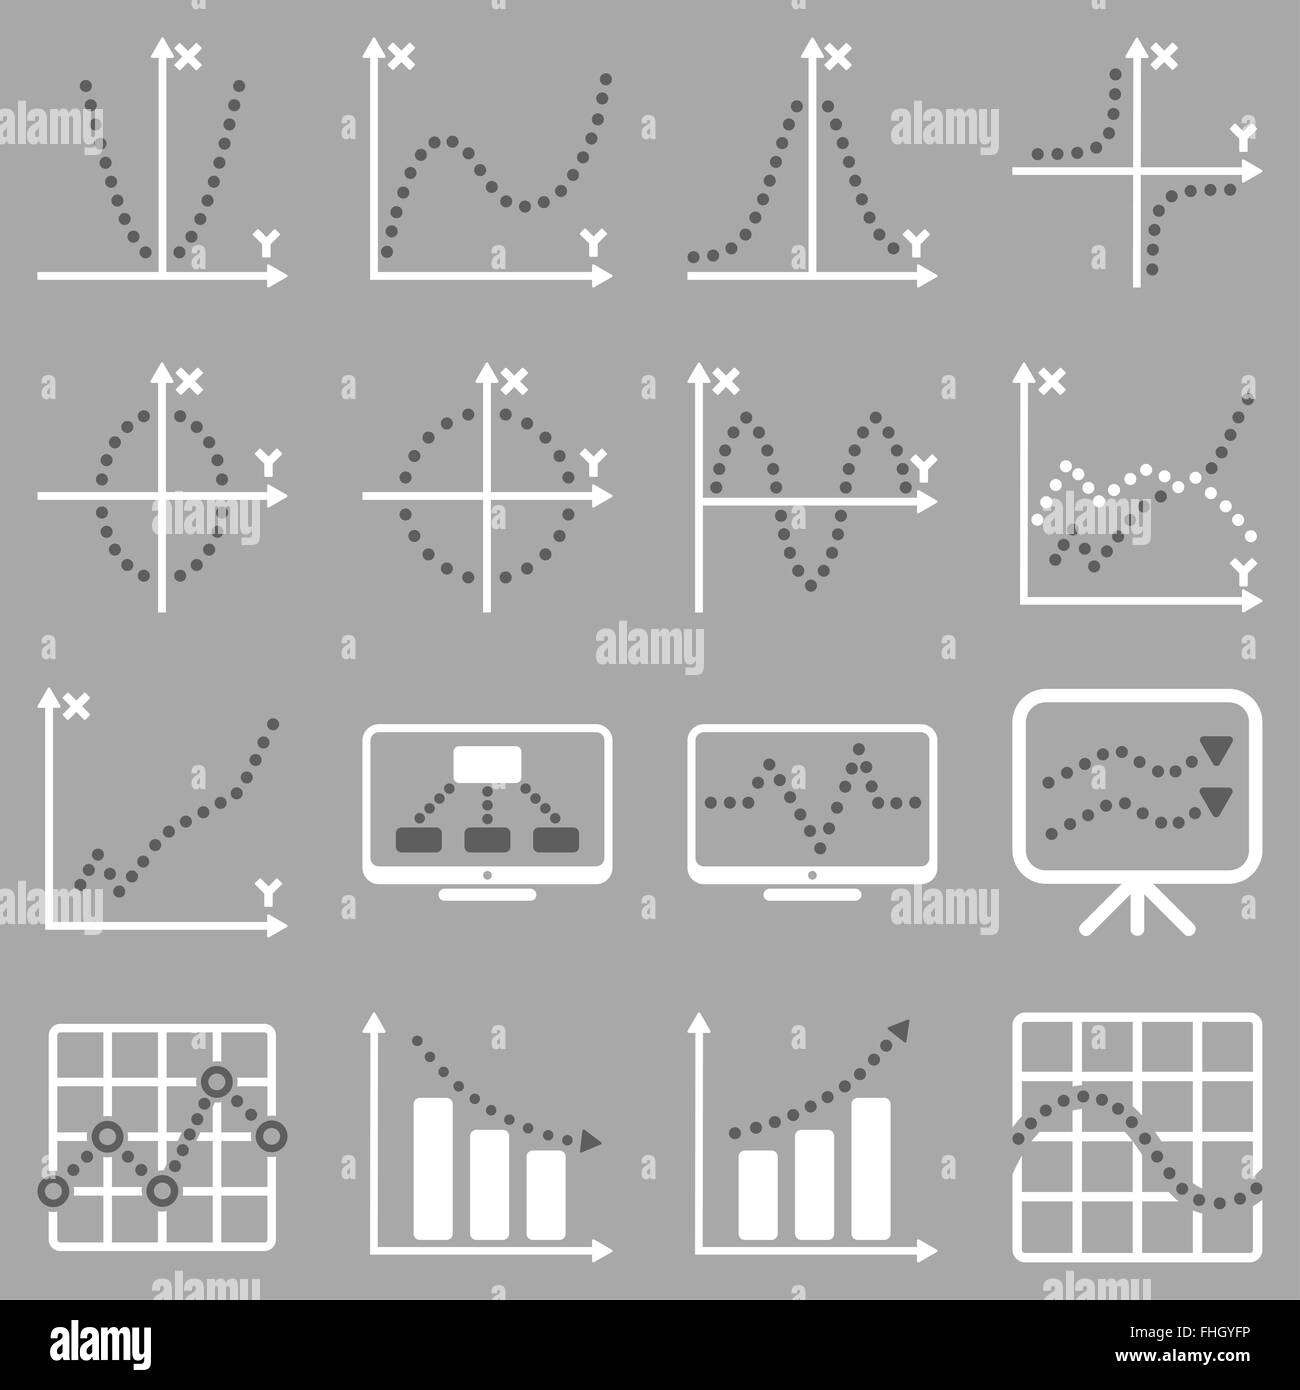 Dotted vector infographic business icons Stock Photo